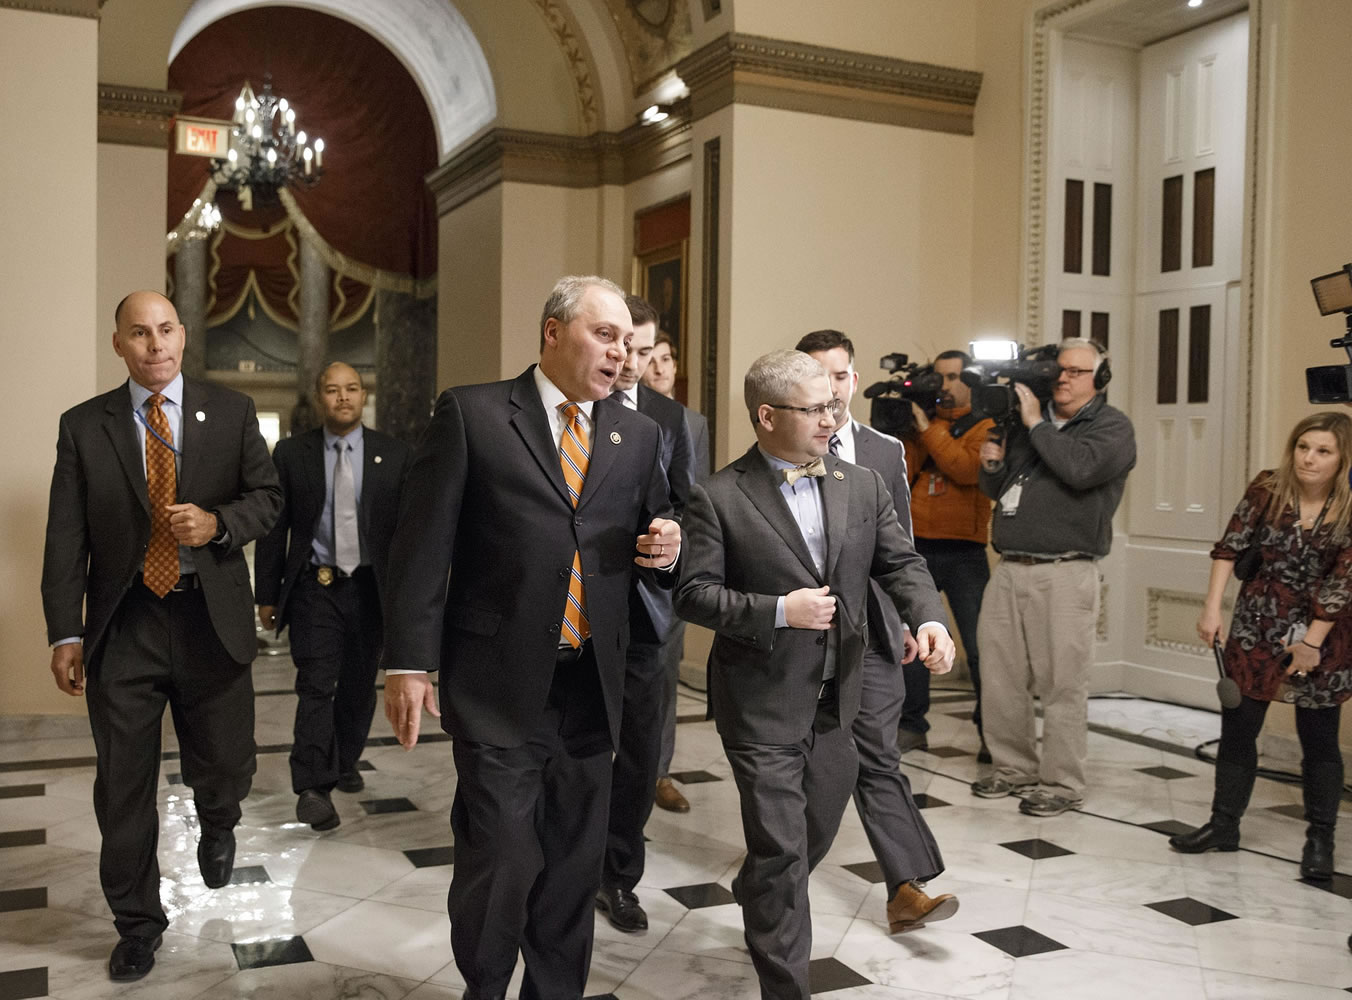 House Majority Whip Steve Scalise, R-La., center left, and  Rep. Patrick T. McHenry, R-N.C., the chief deputy whip, walk to the chamber as Congress passed a one-week bill late Friday night, Feb. 27, 2015, to avert a partial shutdown of the Homeland Security Department, as leaders in both political parties quelled a revolt by House conservatives furious that the measure left President Barack Obama's immigration policy intact, at the Capitol in Washington. (AP Photo/J.